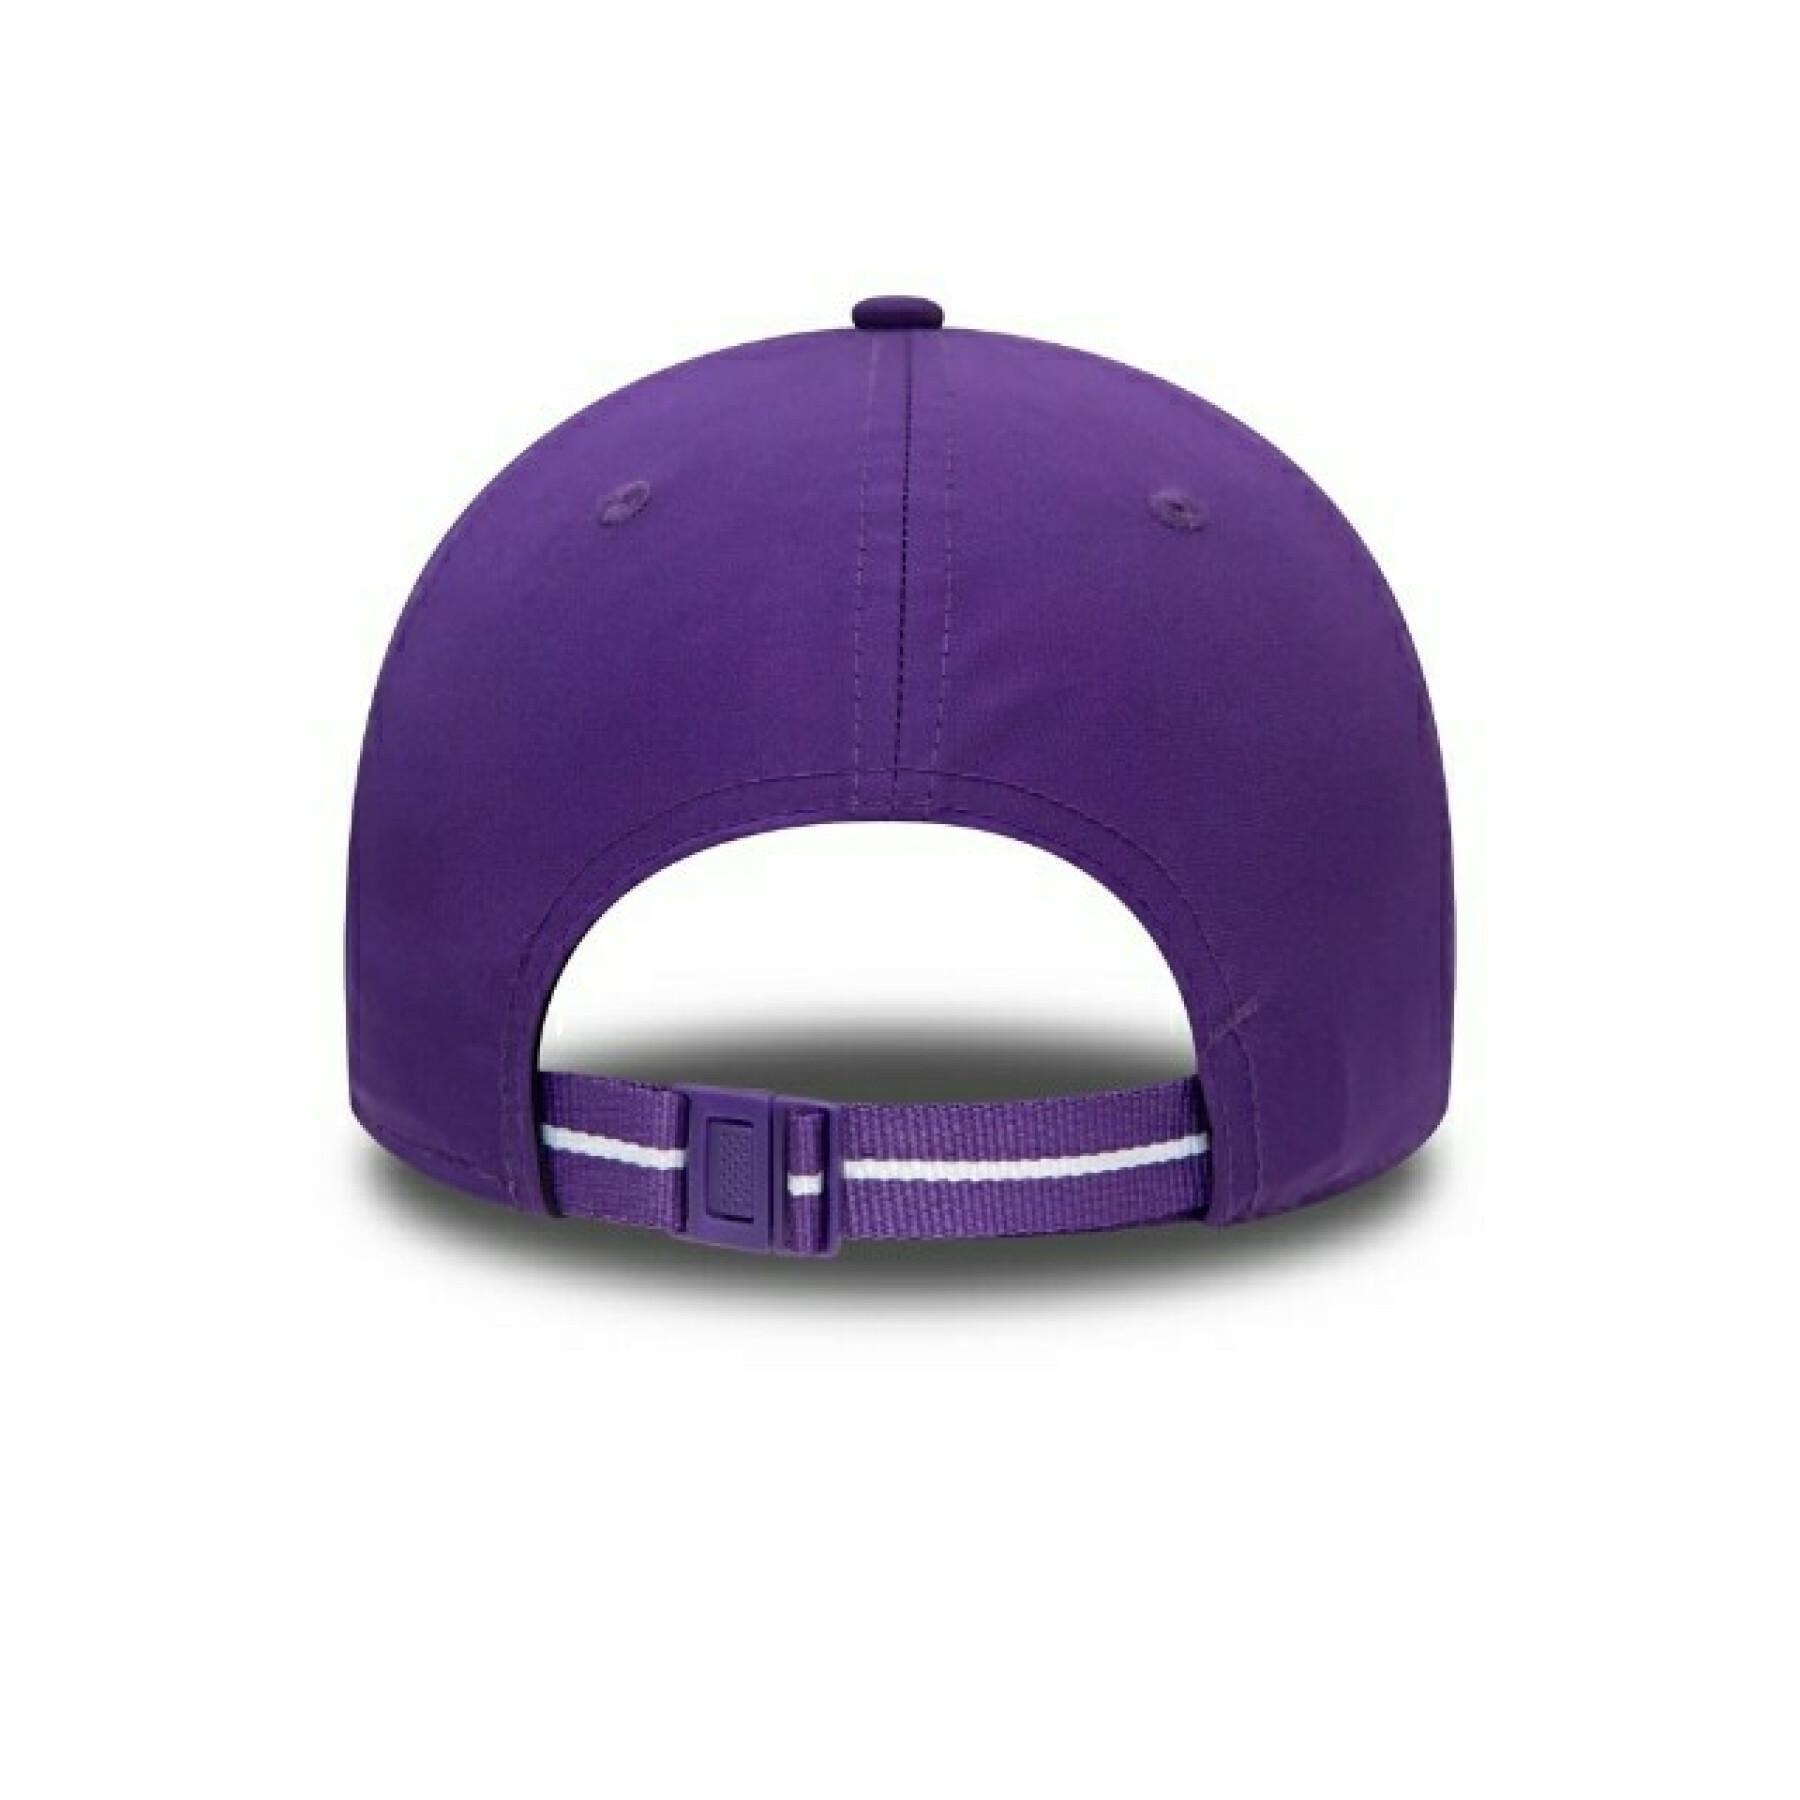 Gorra 9forty Los Angeles Lakers 2021/22